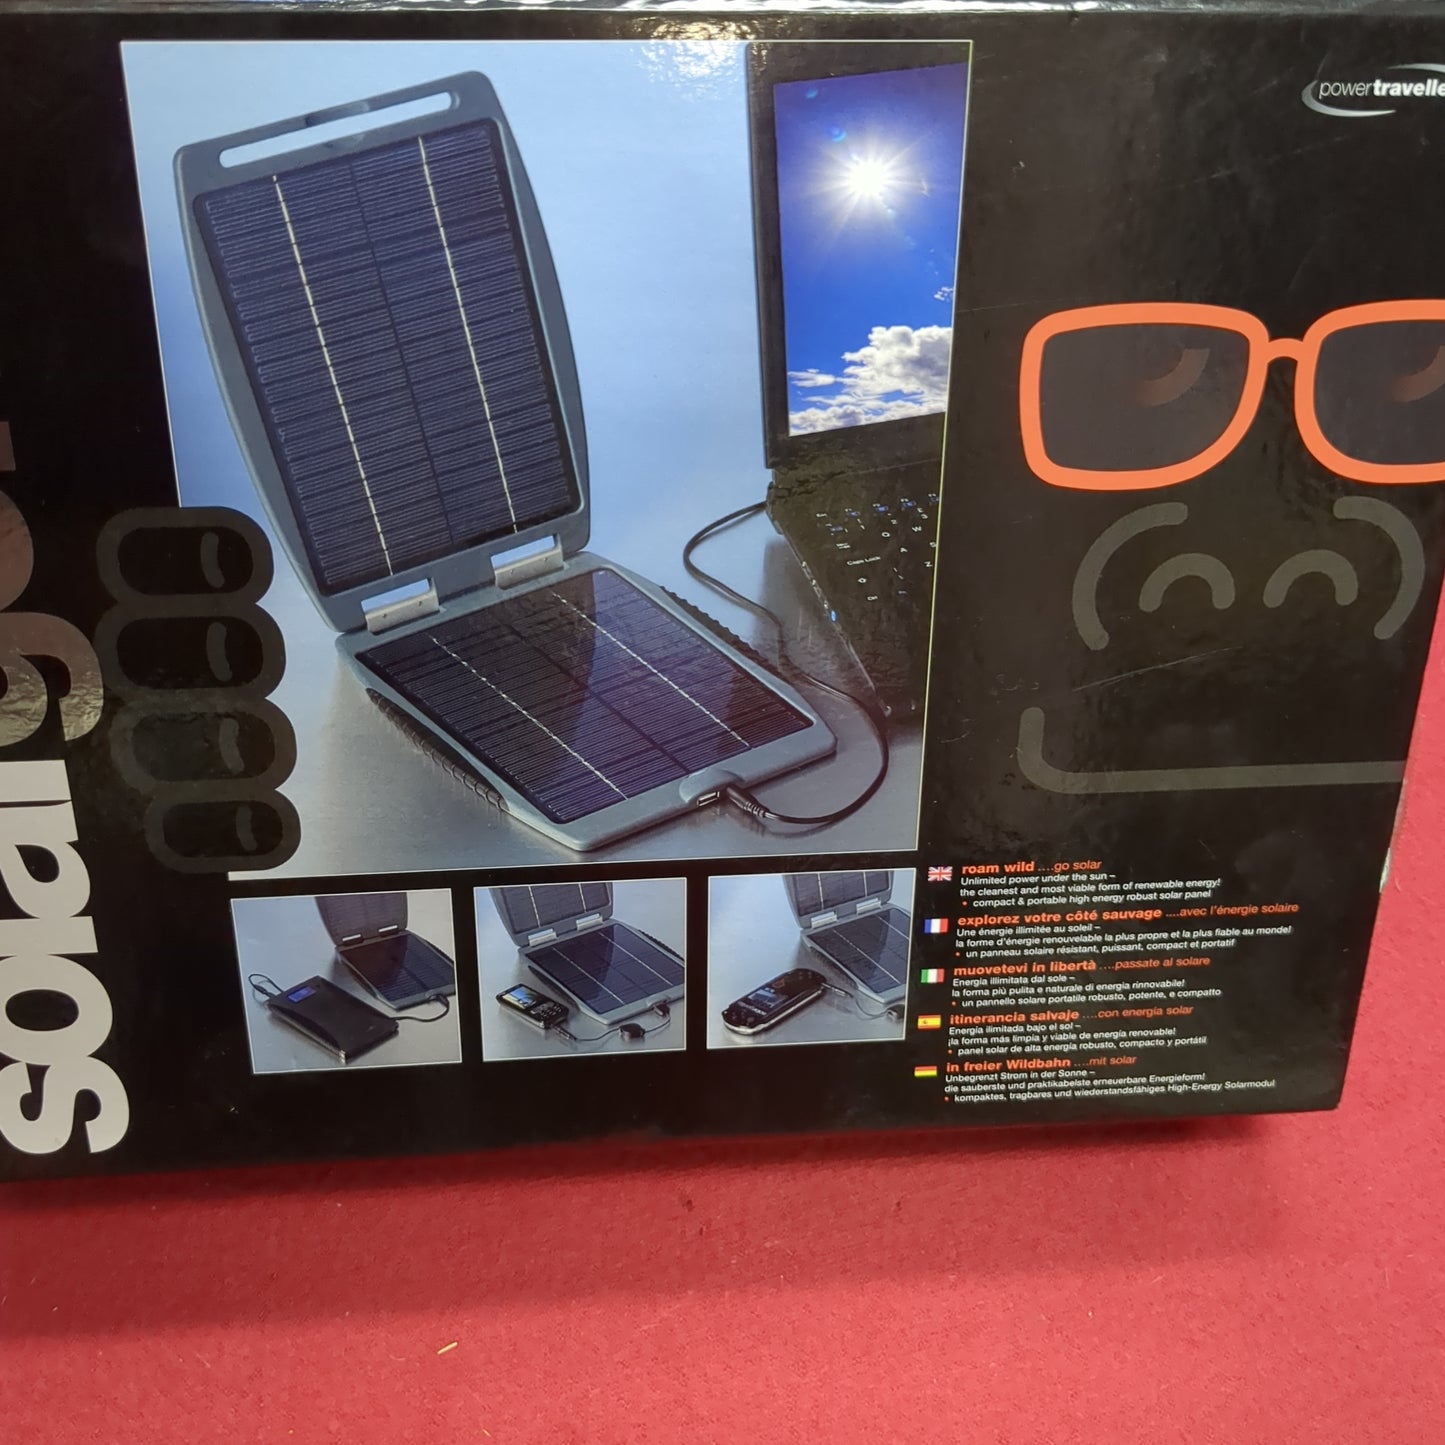 NOS Power Traveller Solar Gorilla with Case and Attachments (A16 BAR-t)